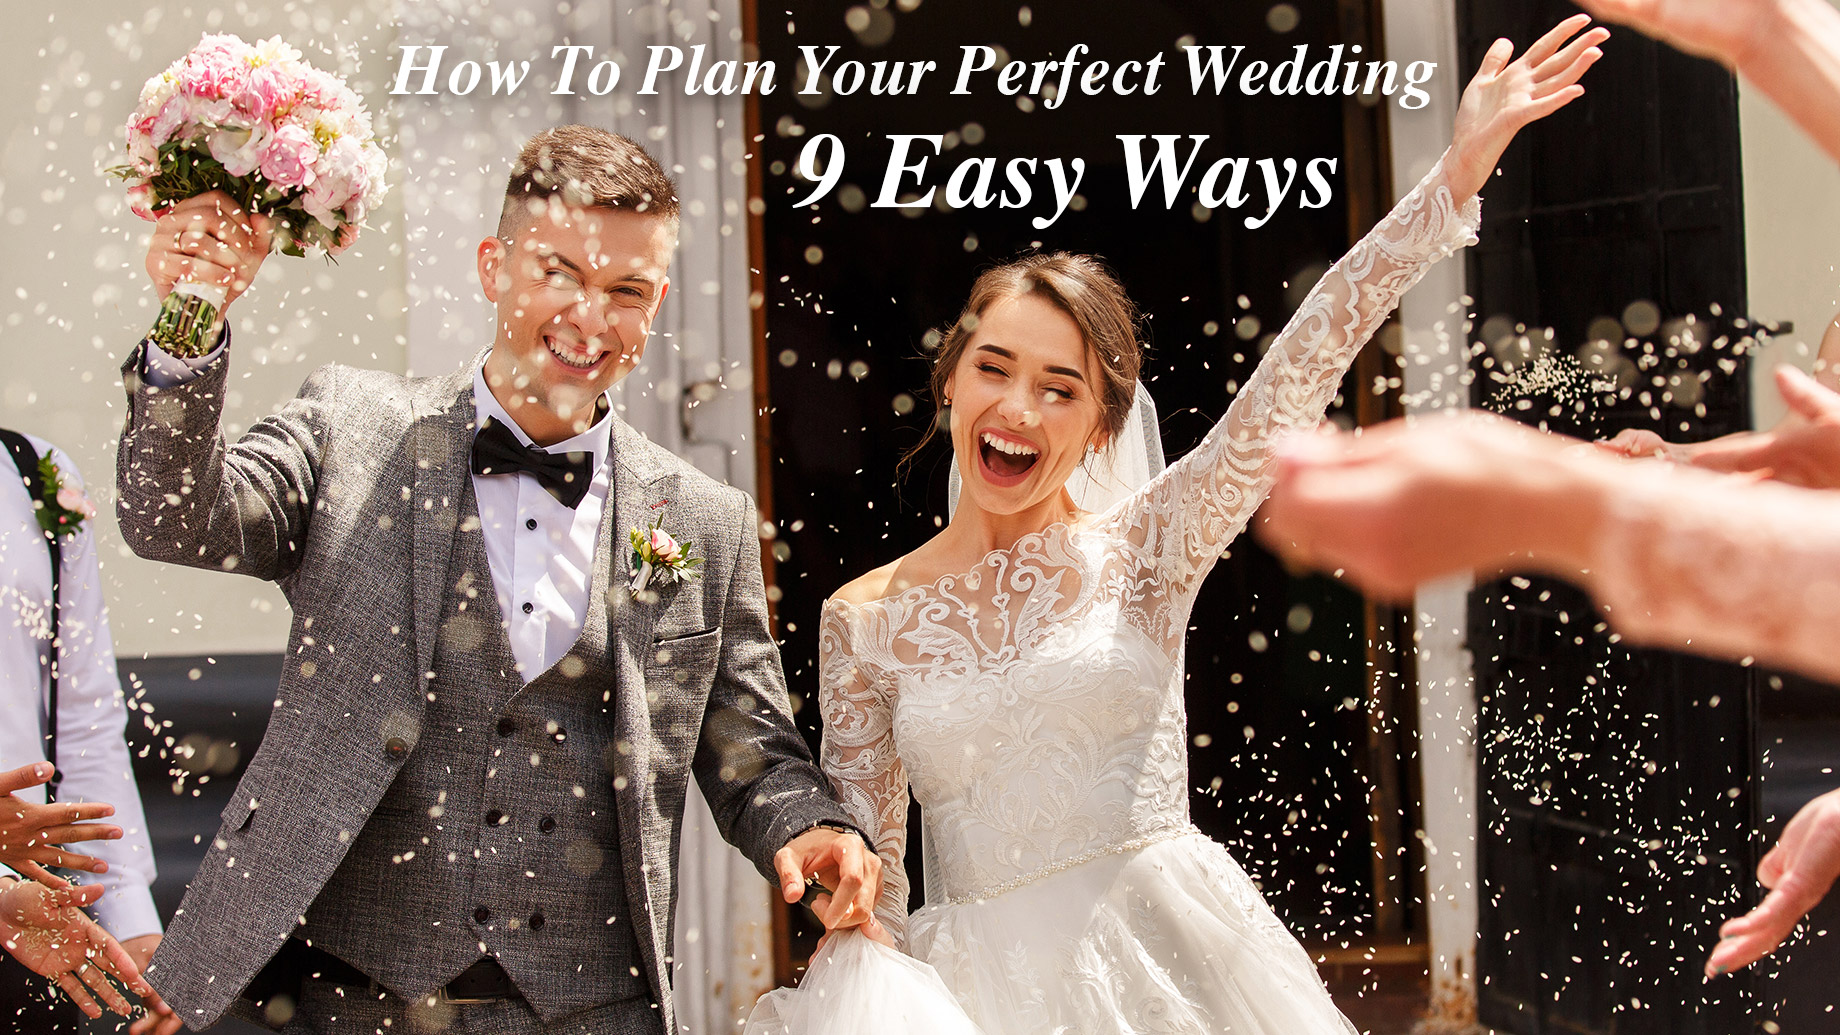 How To Plan Your Perfect Wedding - 9 Easy Ways